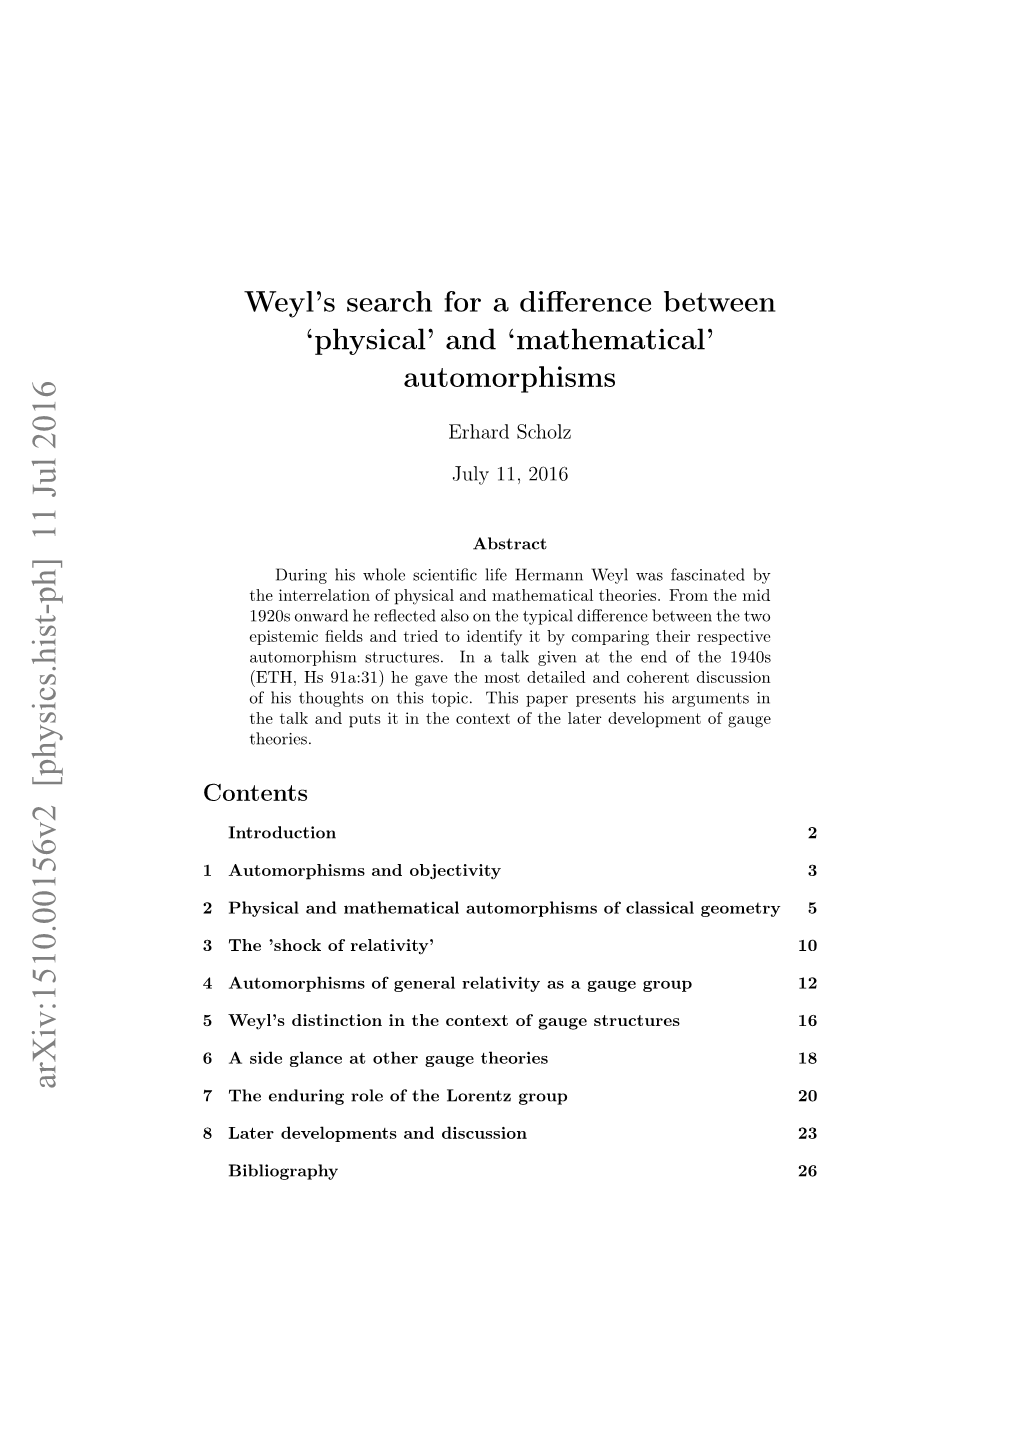 Weyl's Search for a Difference Betweenphysical'andmathematical